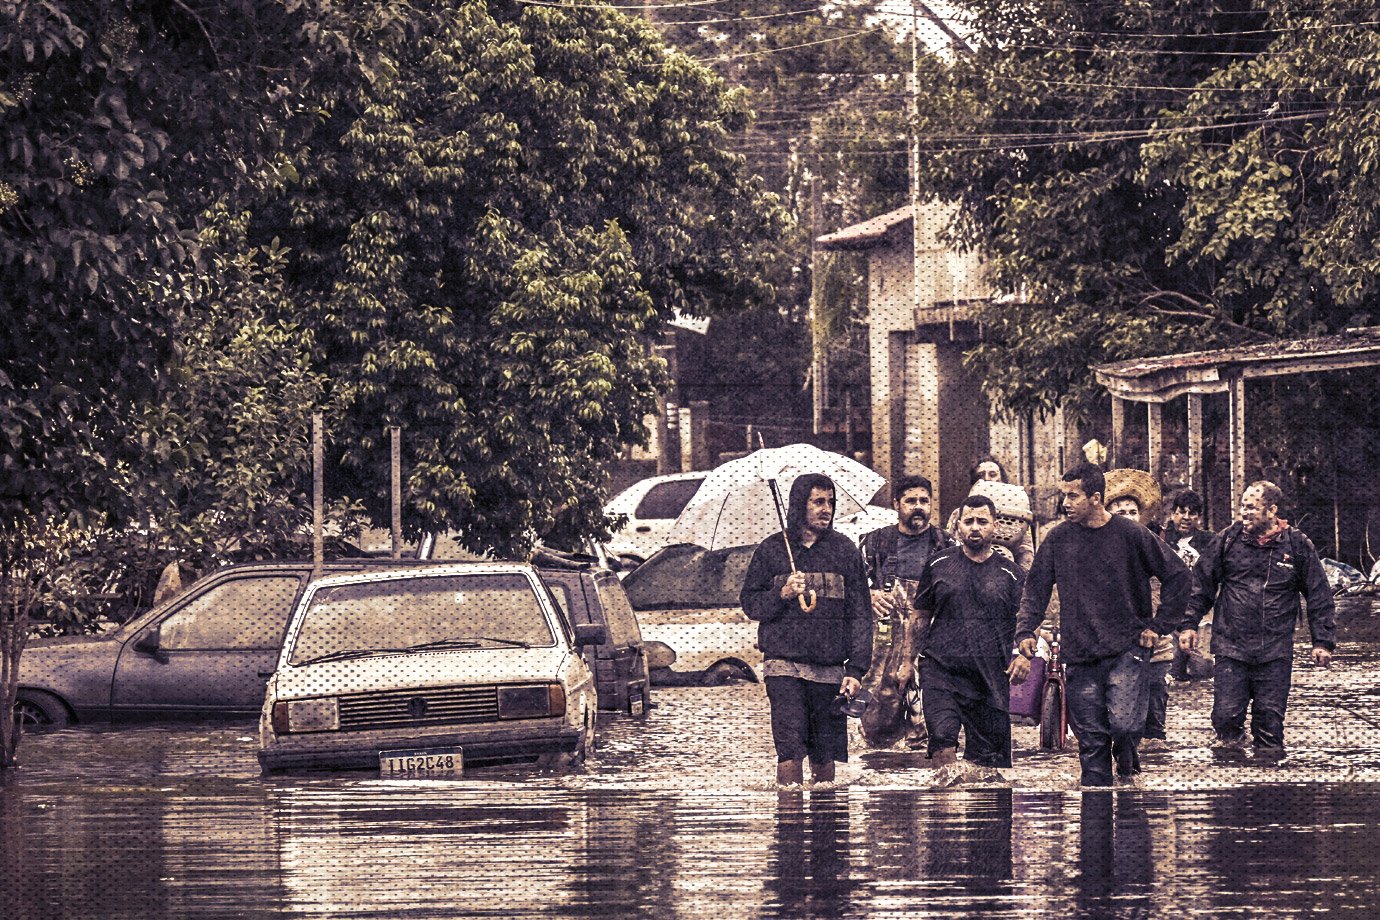 Residents wade through a flooded street in the Harmonia neighborhood in the city of Canoas, Rio Grande do Sul state, Brazil, on May 13, 2024. Brazil's President Luiz Inacio Lula da Silva on Monday put off a state visit to Chile to focus on the historic floods in the south of the country that have left 147 dead. Torrential rains since the beginning of the month in Rio Grande do Sul state have caused rivers to burst their banks, leaving towns and parts of the bustling state capital Porto Alegre under water. Around two million people have been affected, more than 600,000 of whom were forced from their homes due to the disaster, which experts attribute to climate change and the El Nino weather phenomenon. (Photo by NELSON ALMEIDA / AFP)